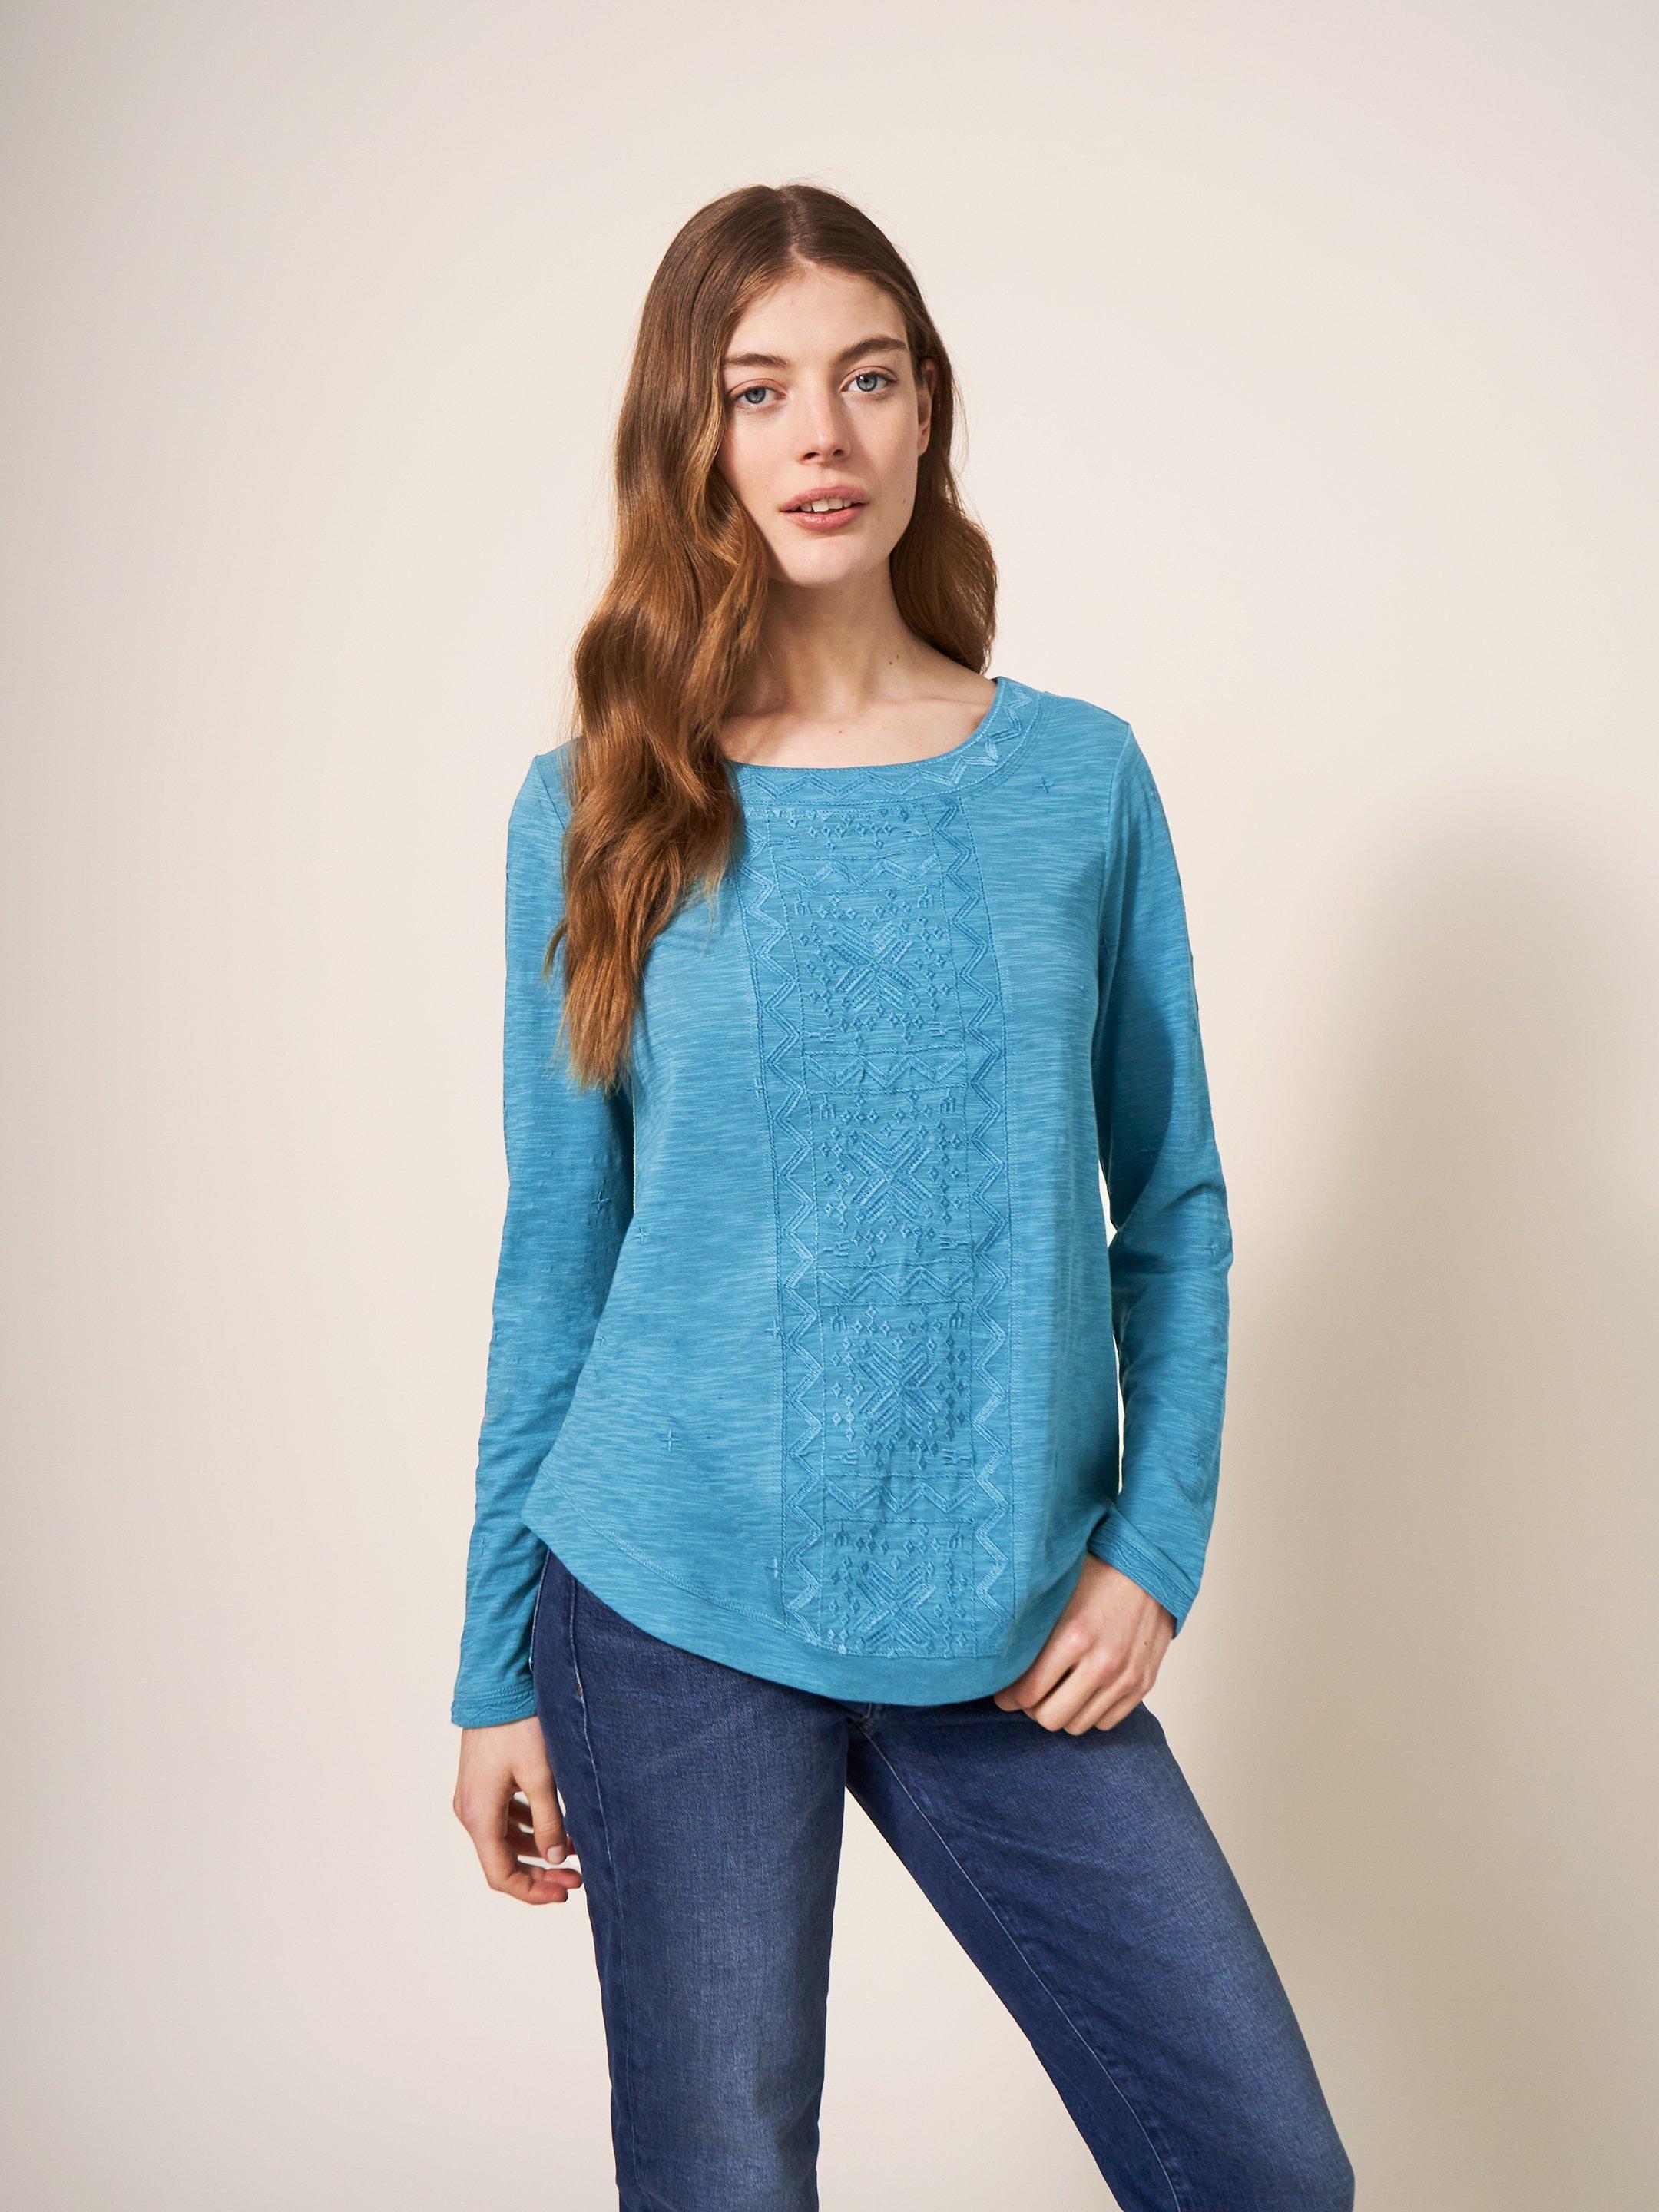 LONG SLEEVE EMBROIDERED WEAVER